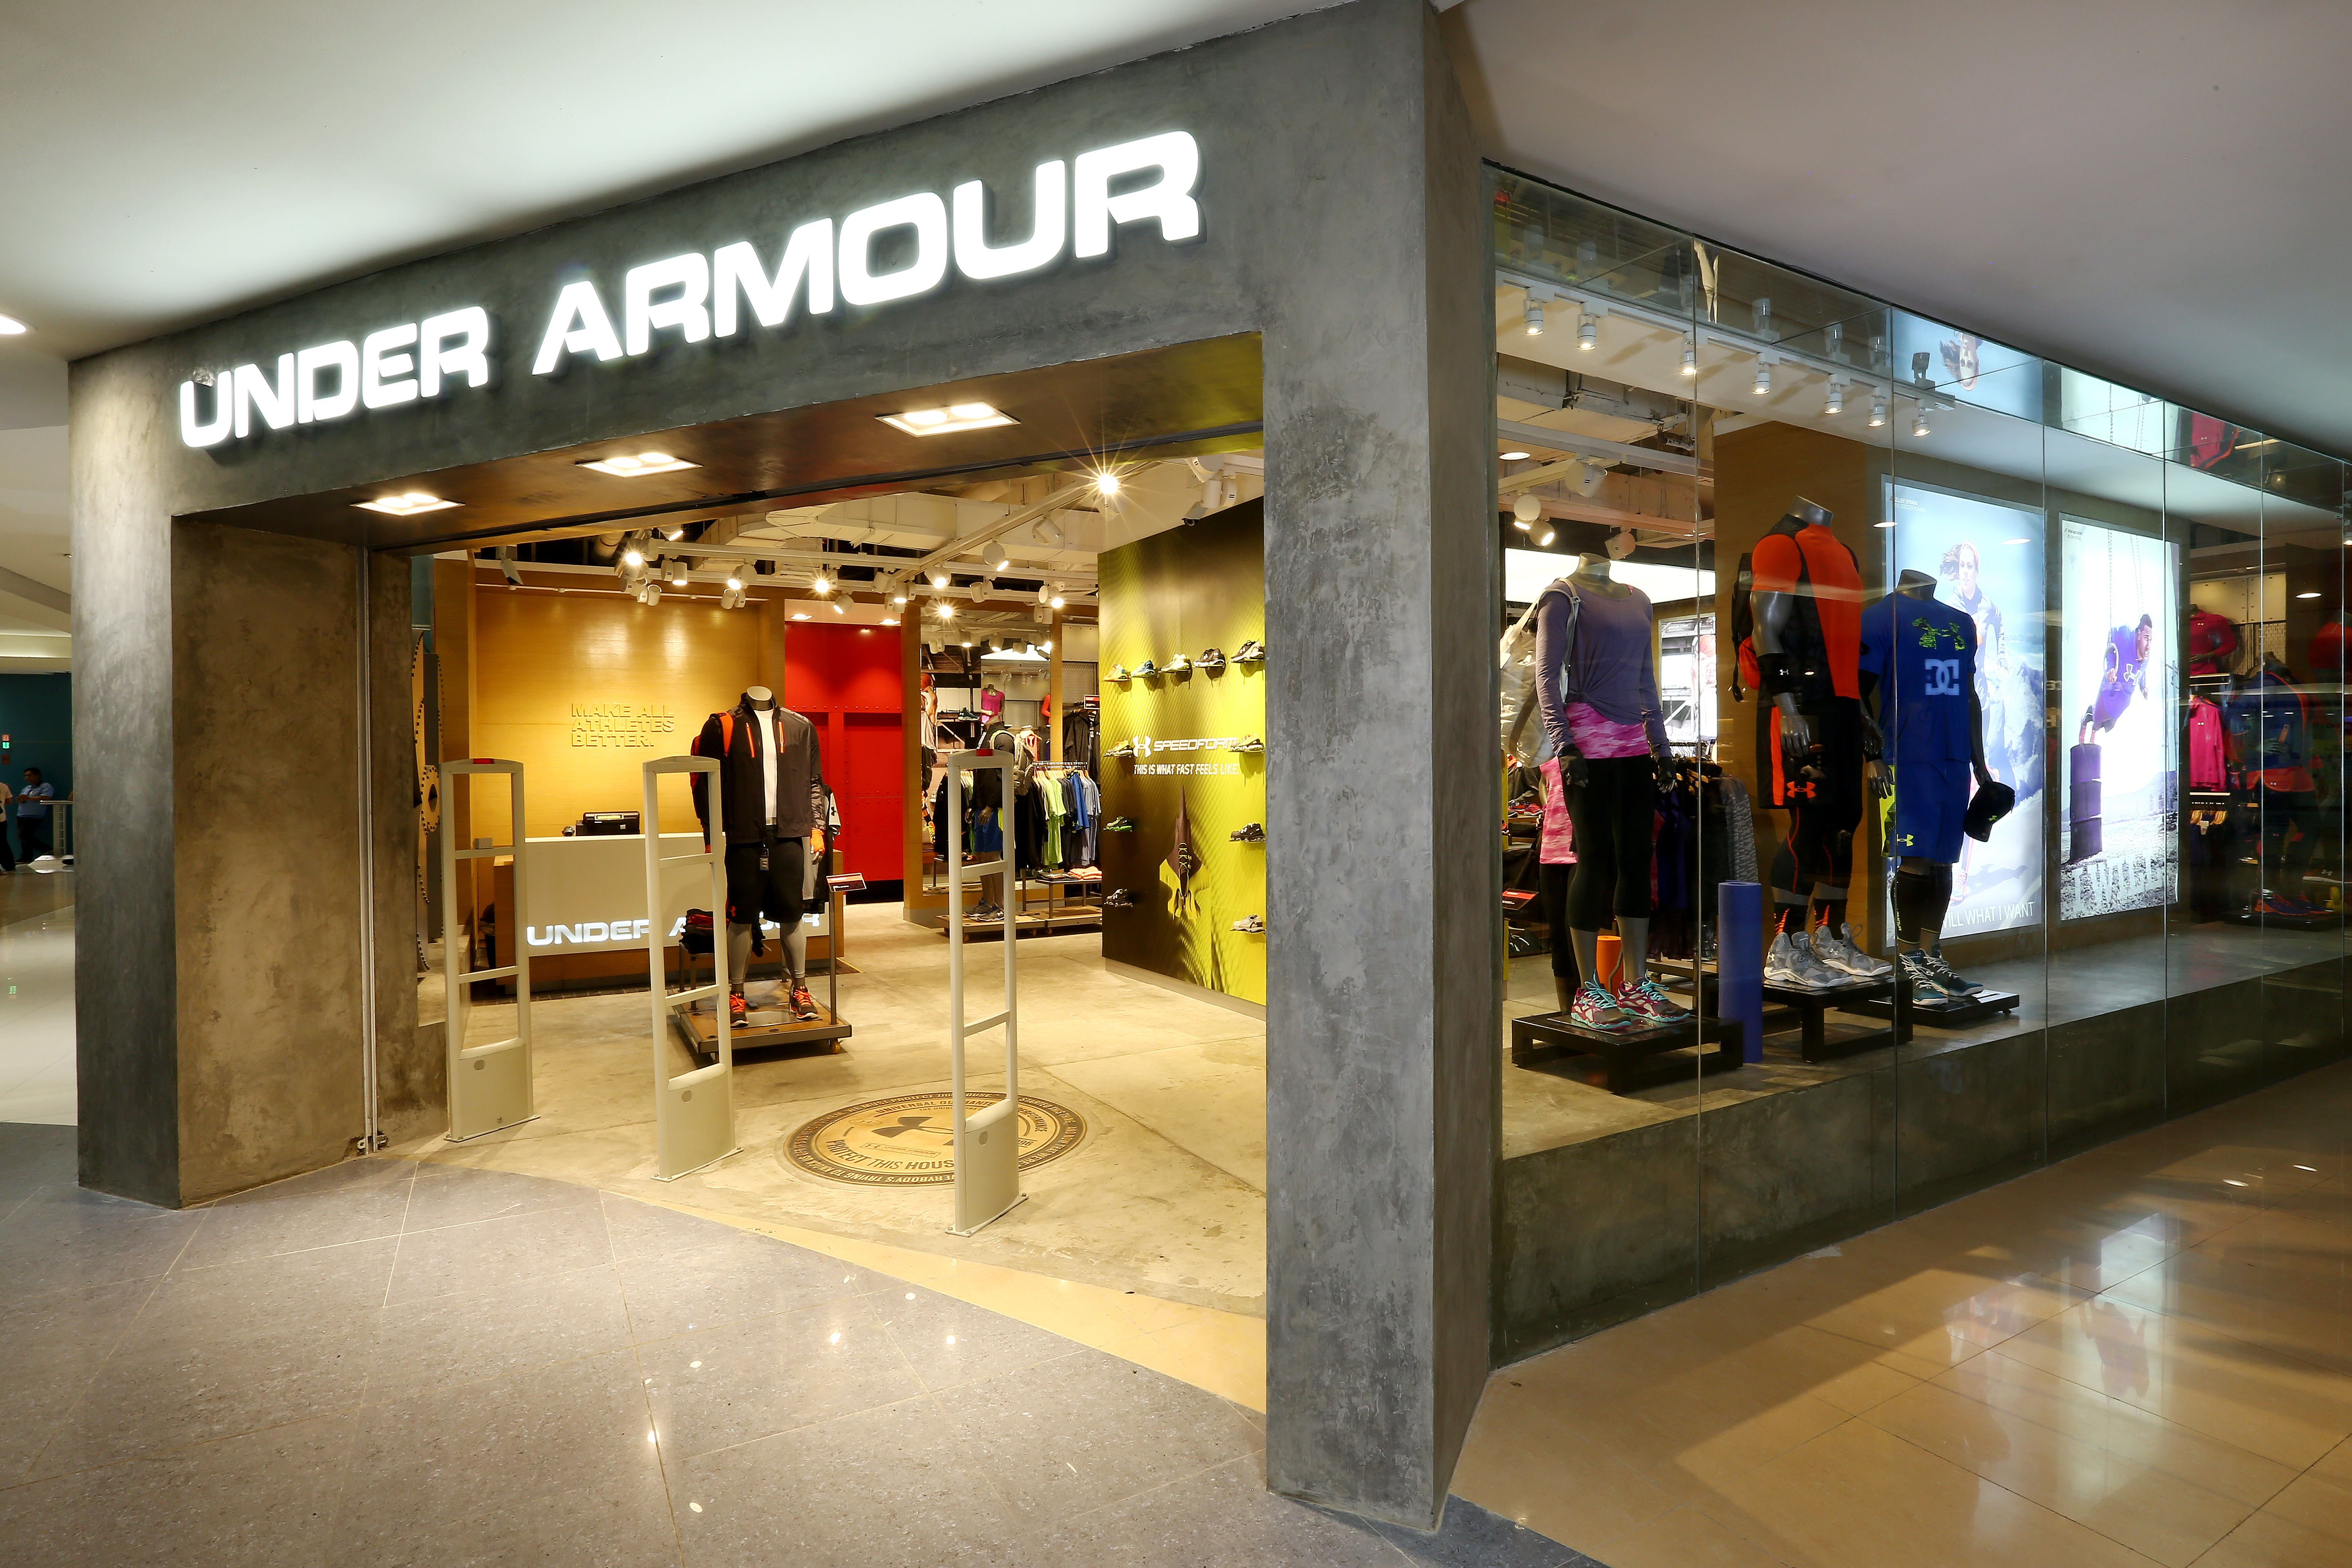 Under Armour's Touchdown in Megamall